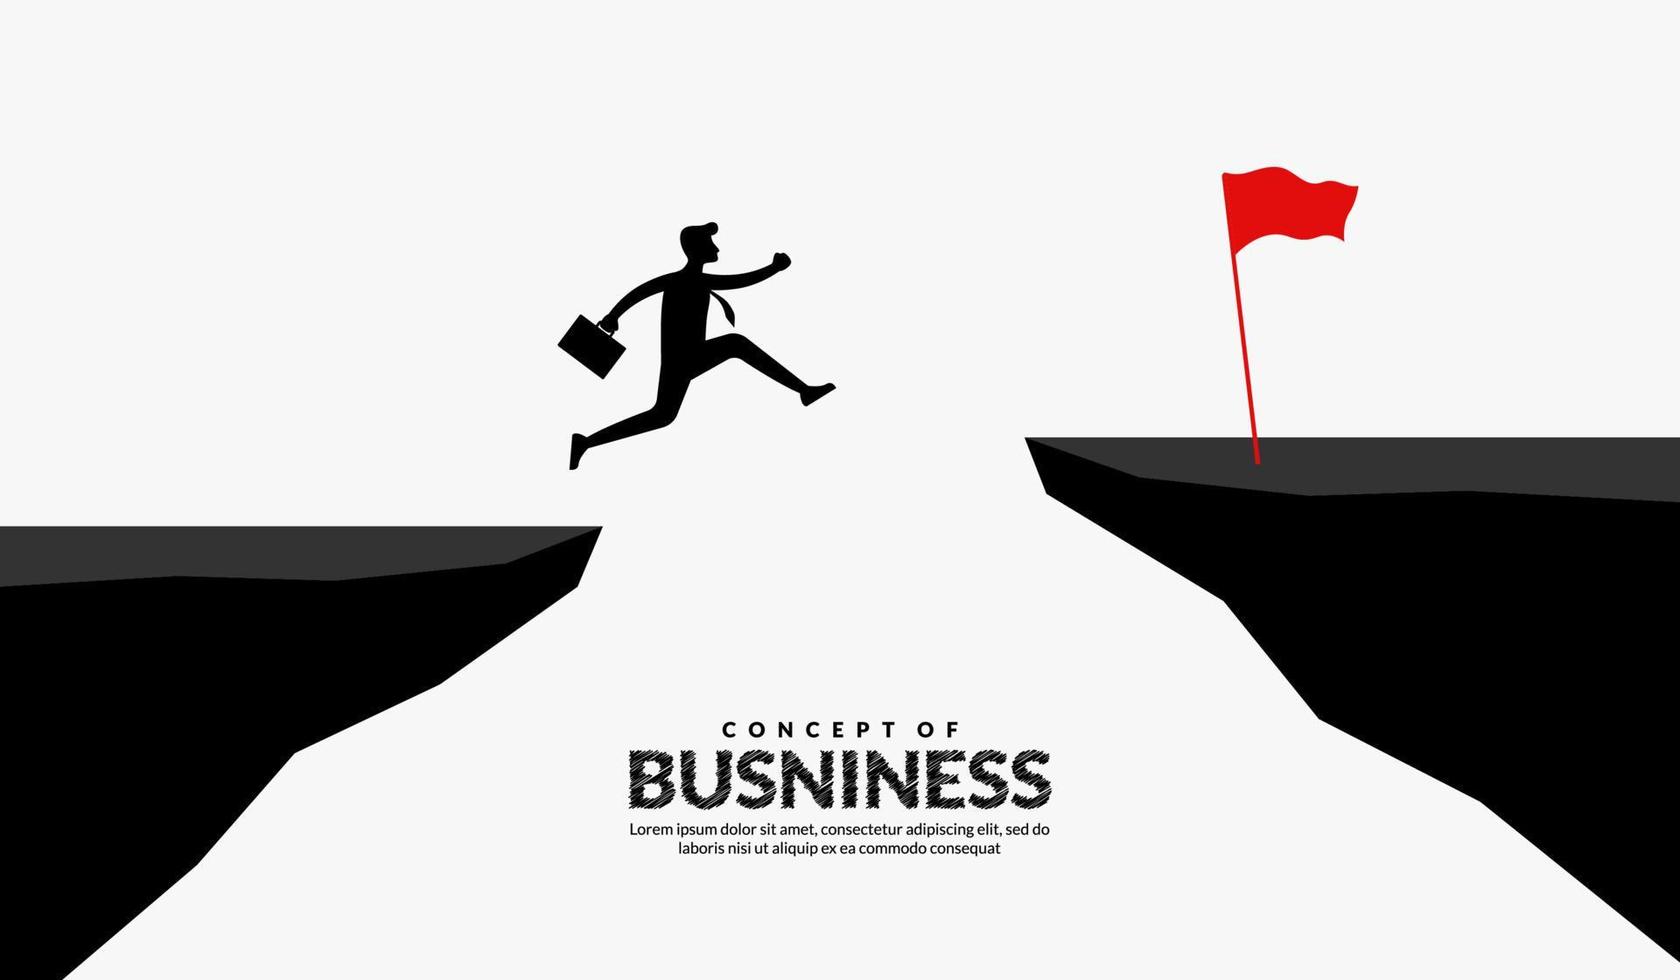 Businessman jump over cliffs through across obstacles to success, business overcome and success concept vector